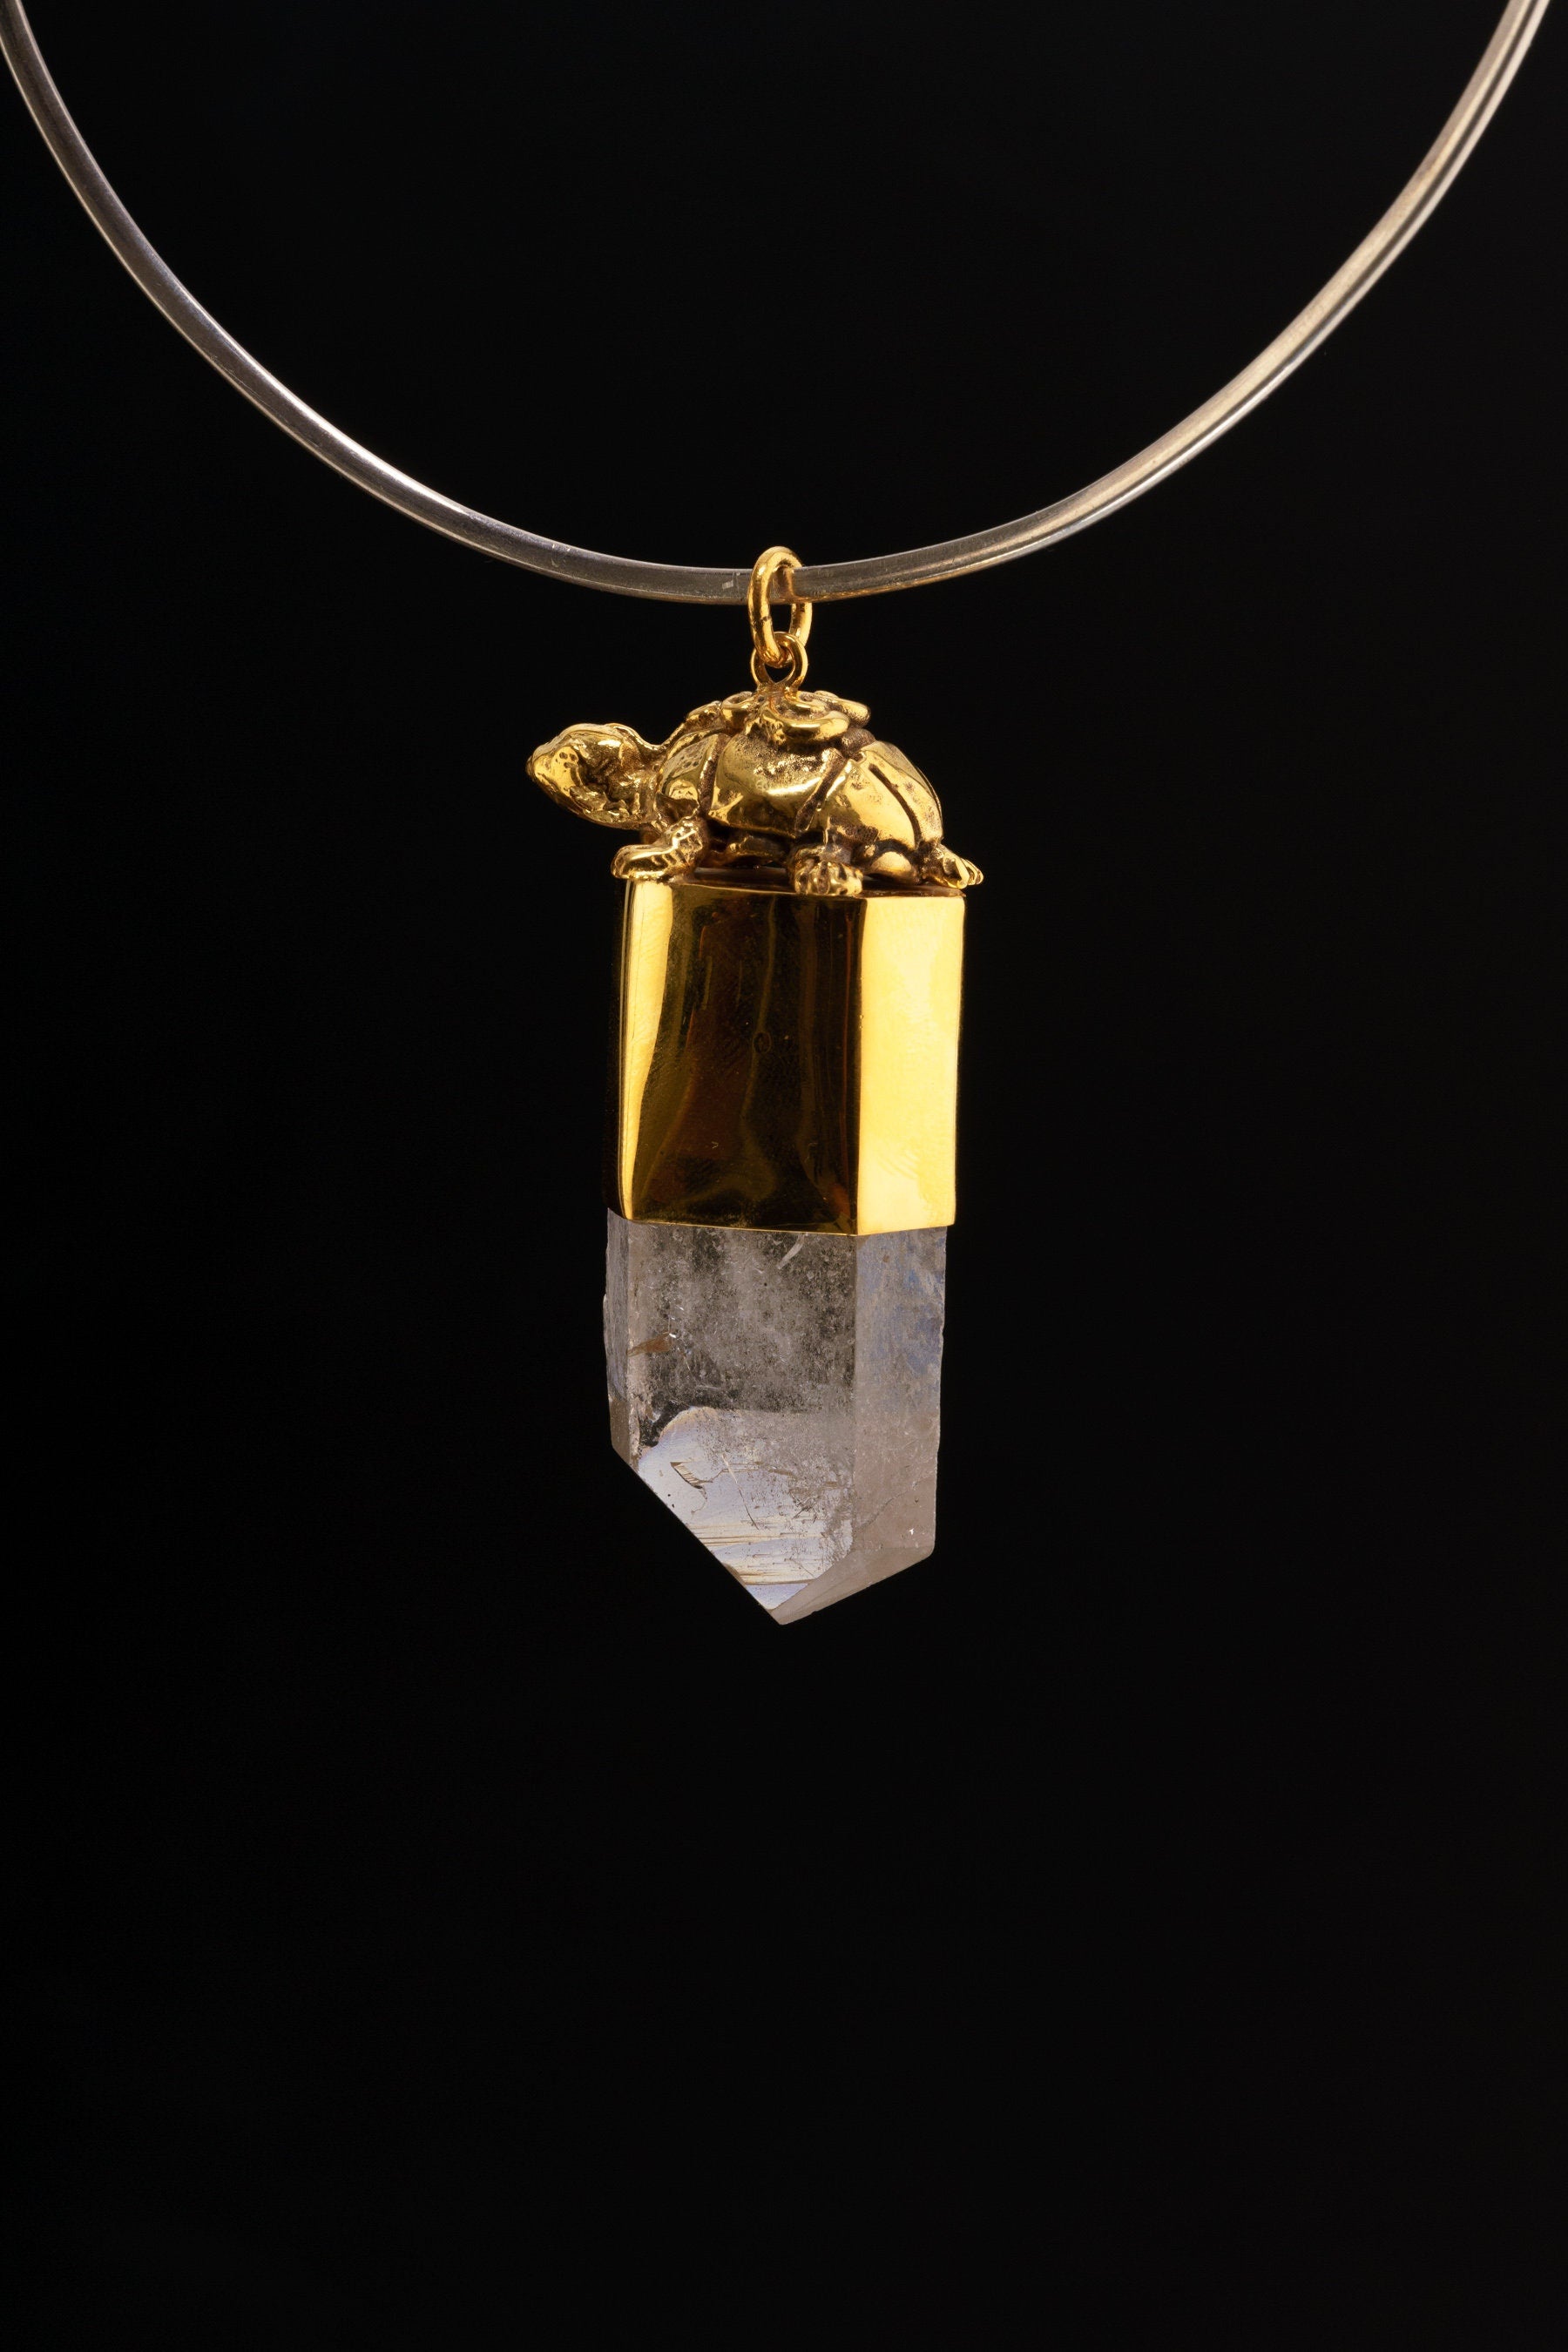 Chunky Himalayan Terminated Quartz & Golden rutile Cabochon - Gold Platerd Sterling Silver - Tibetan Turtle Cast - Crystal Pendant